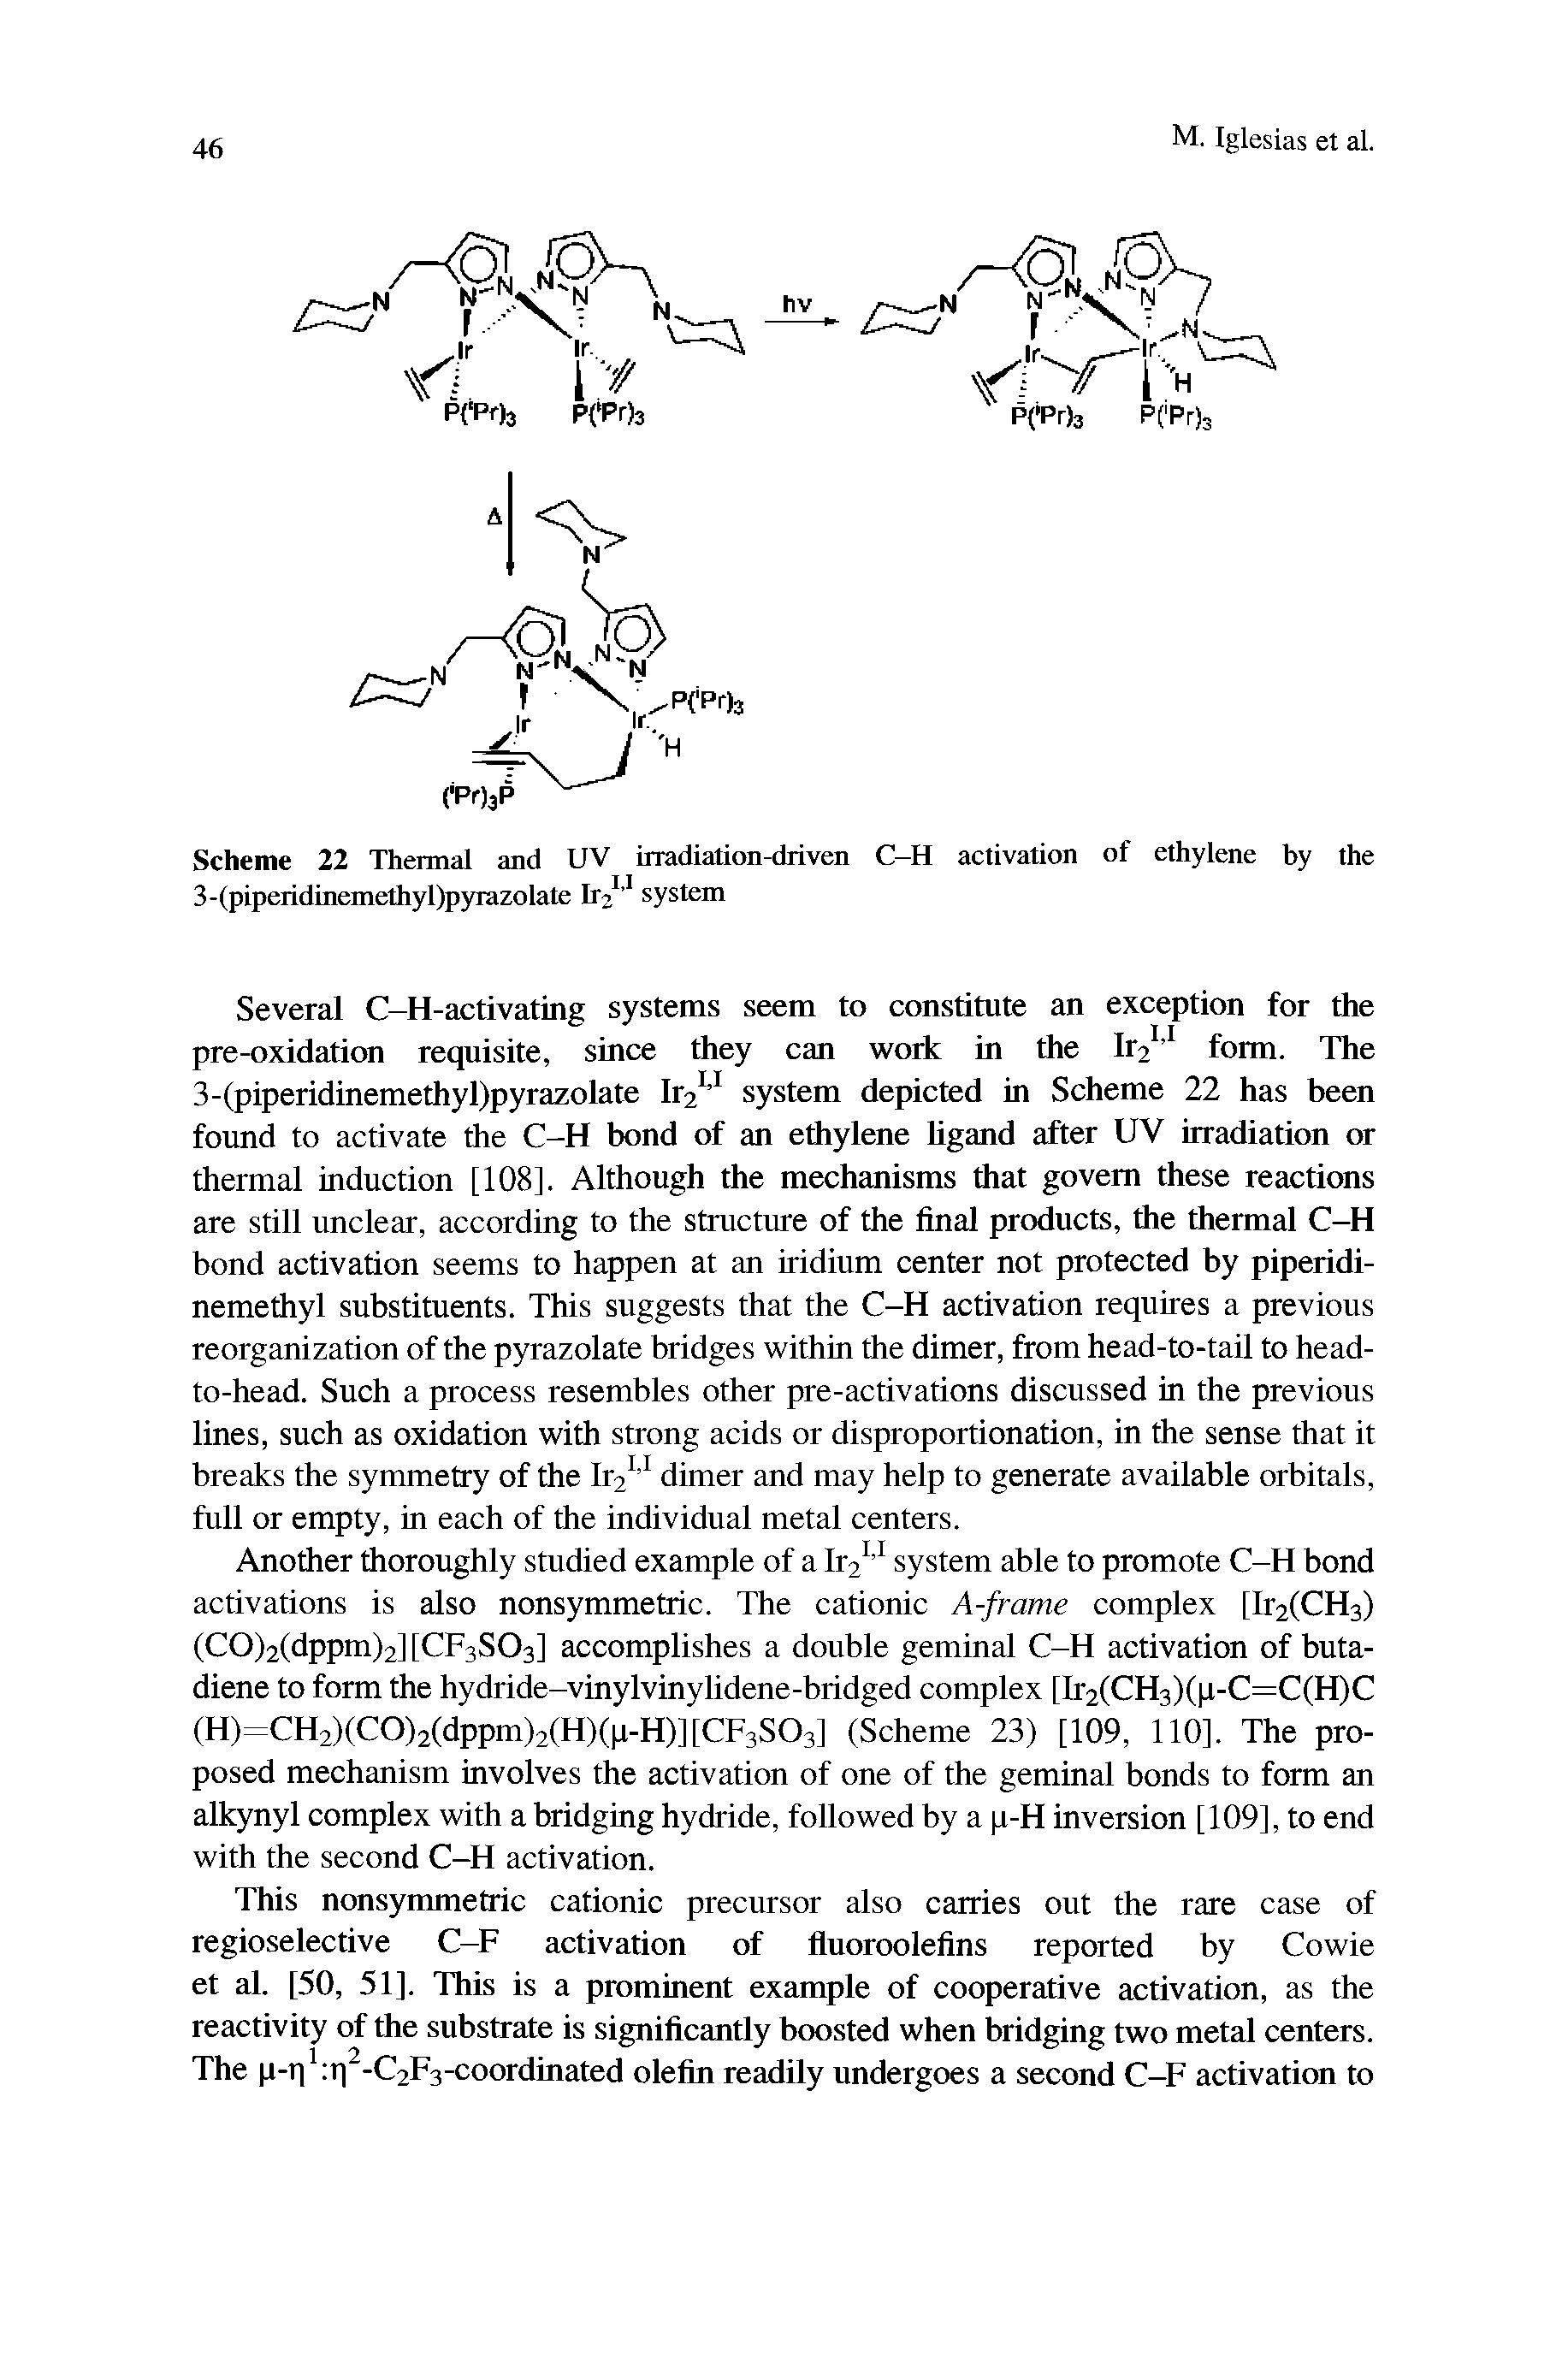 Scheme 22 Thermal and UV irradiation-driven C-H activation of ethylene by the 3-(piperidinemethyl)pyrazolate Ir2 system...